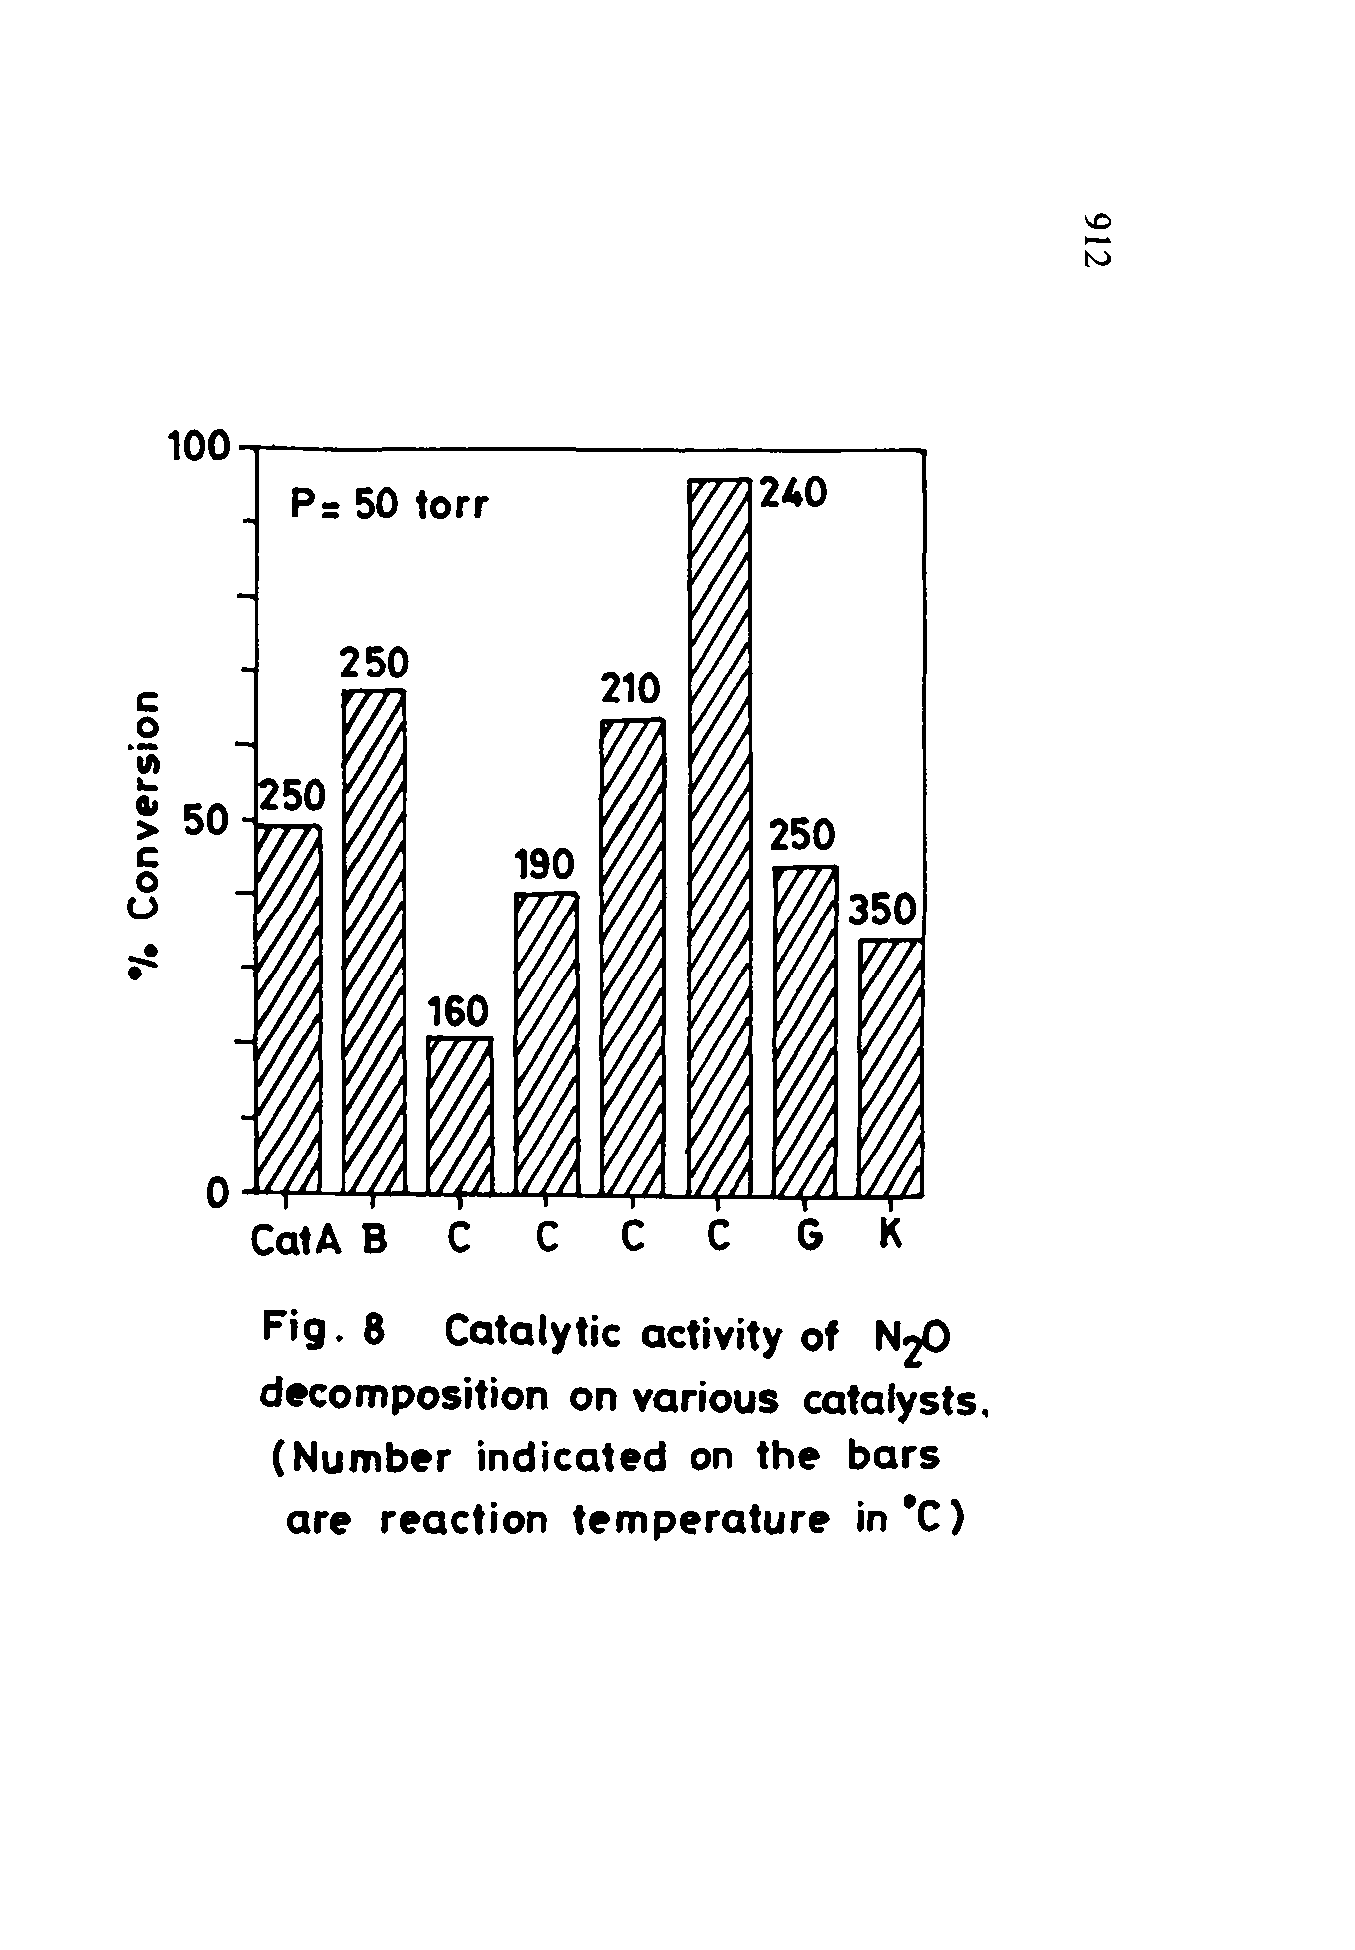 Fig. 8 Catalytic activity of N2O decomposition on various catalysts. (Number indicated on the bars are reaction temperature in C)...